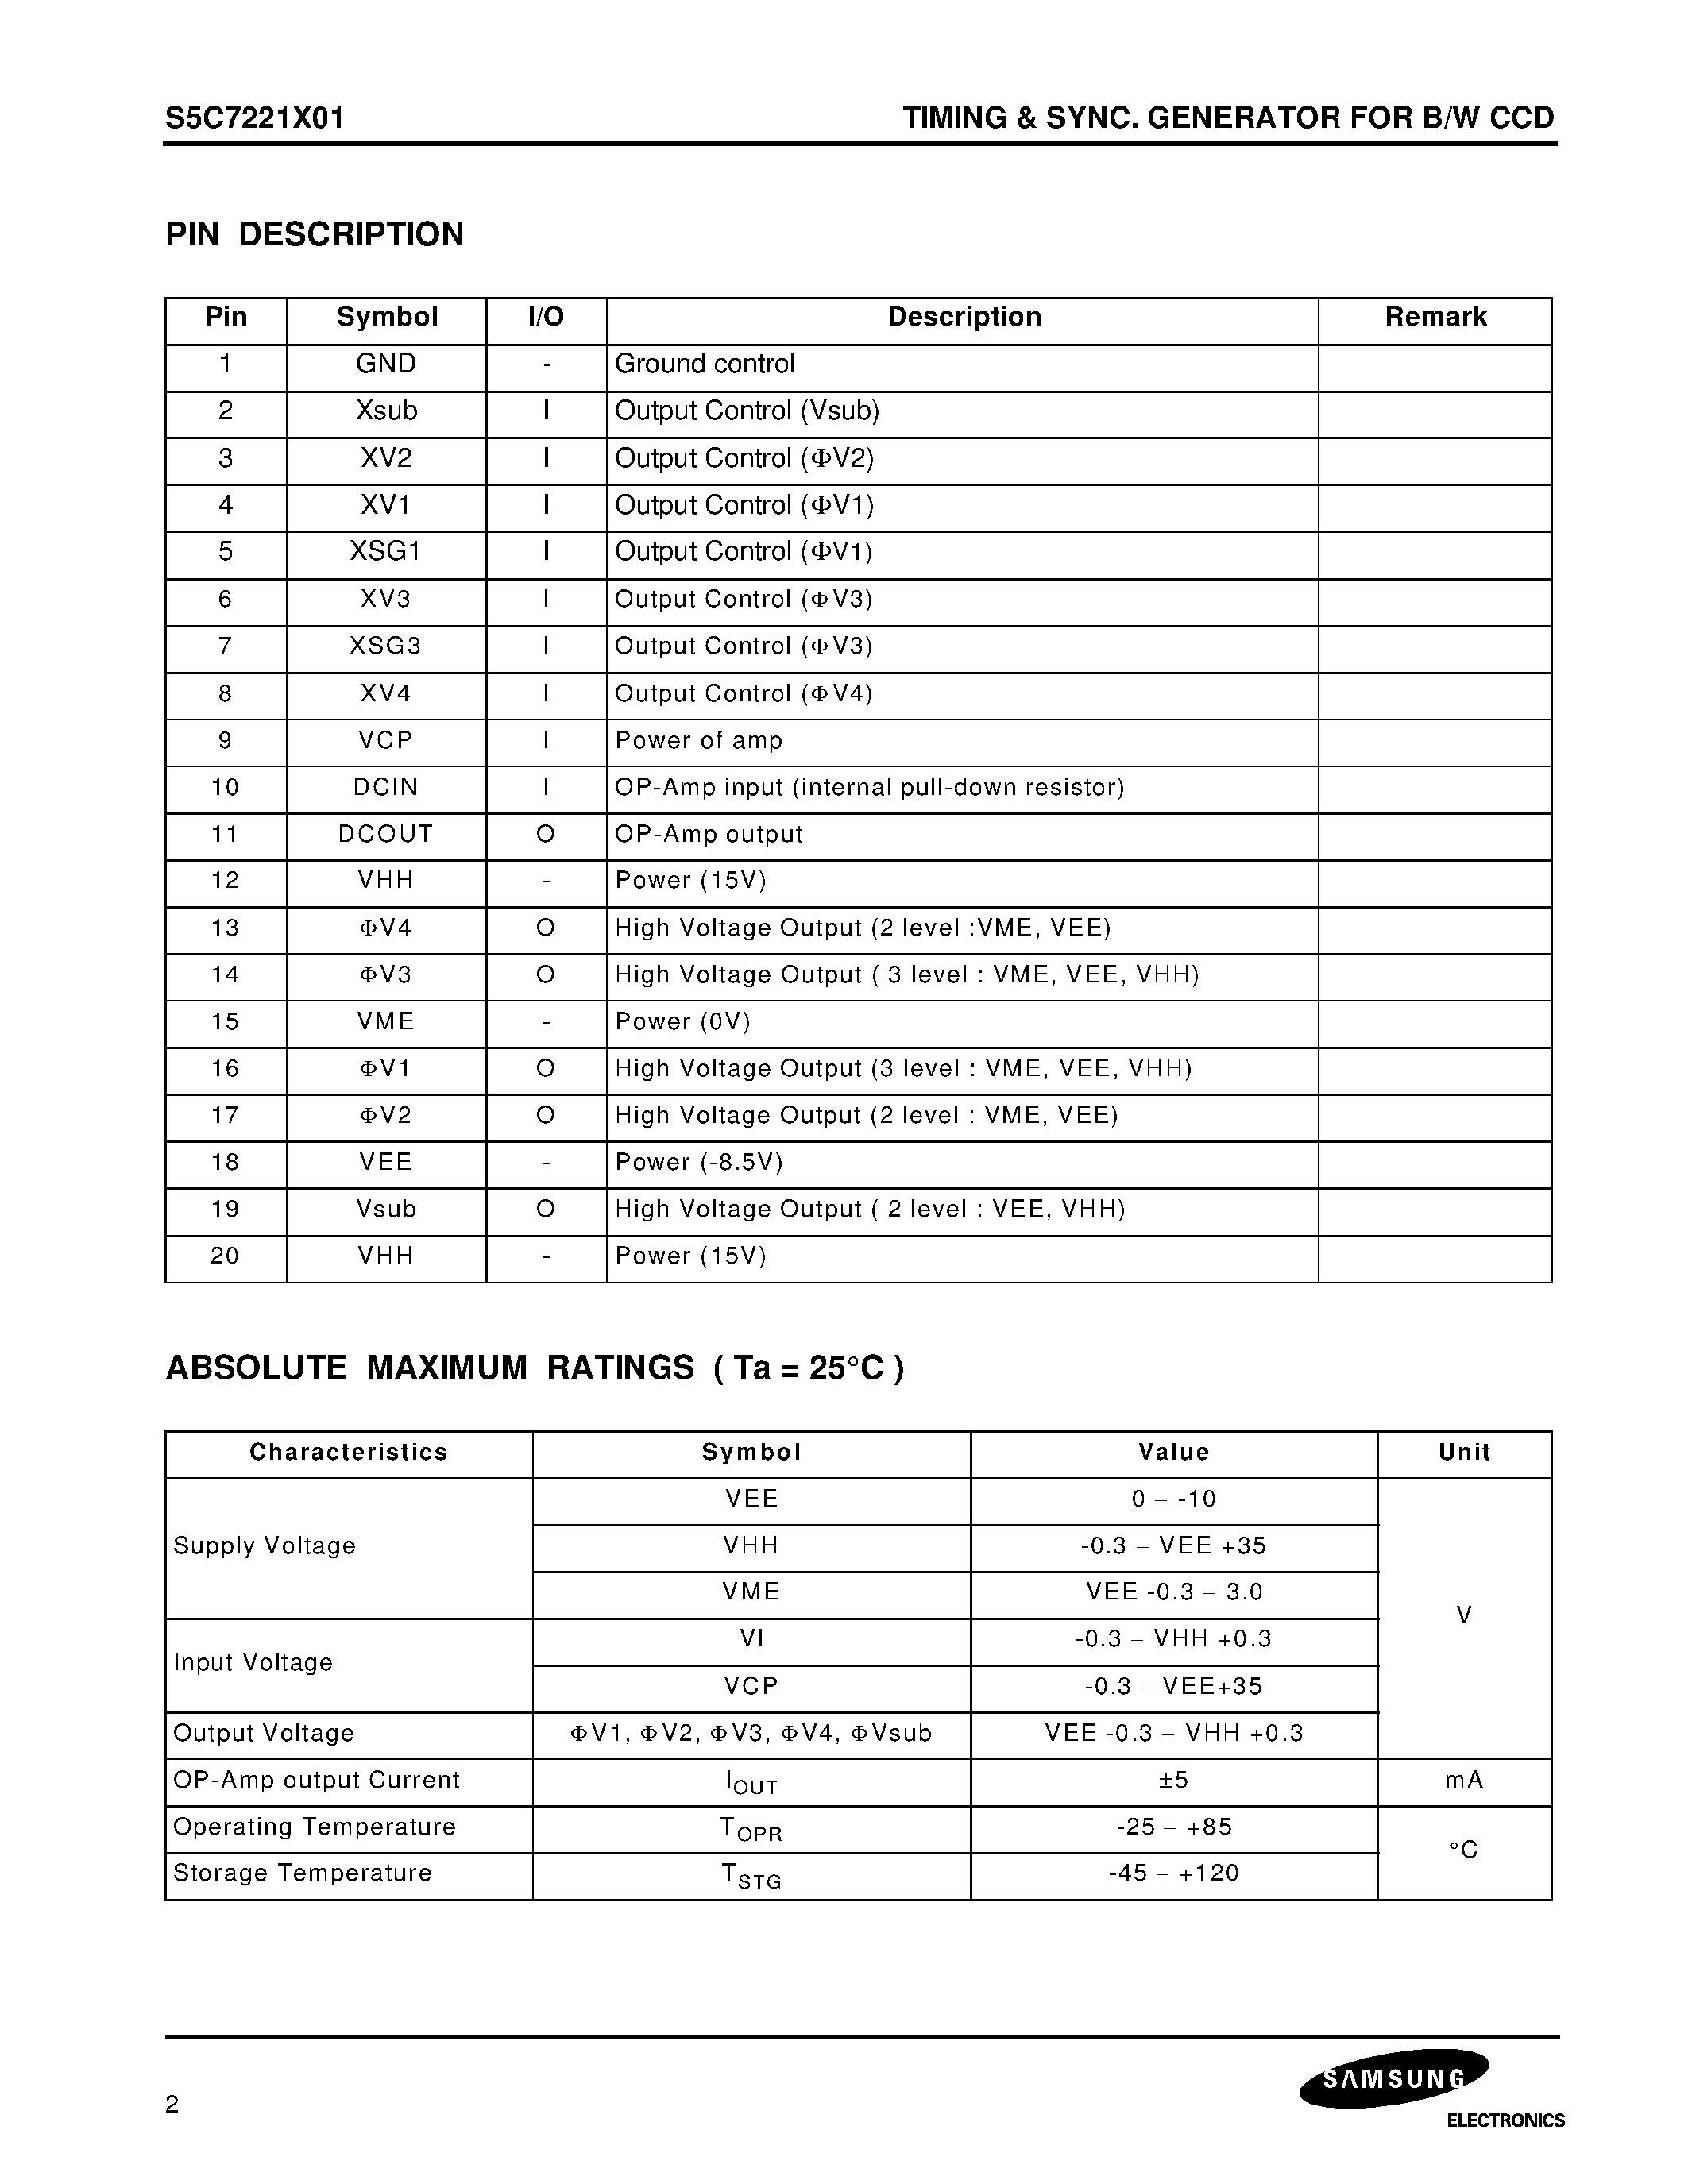 Datasheet S5C7221X - TIMING & SYNC. GENERATOR FOR B/W CCD page 2